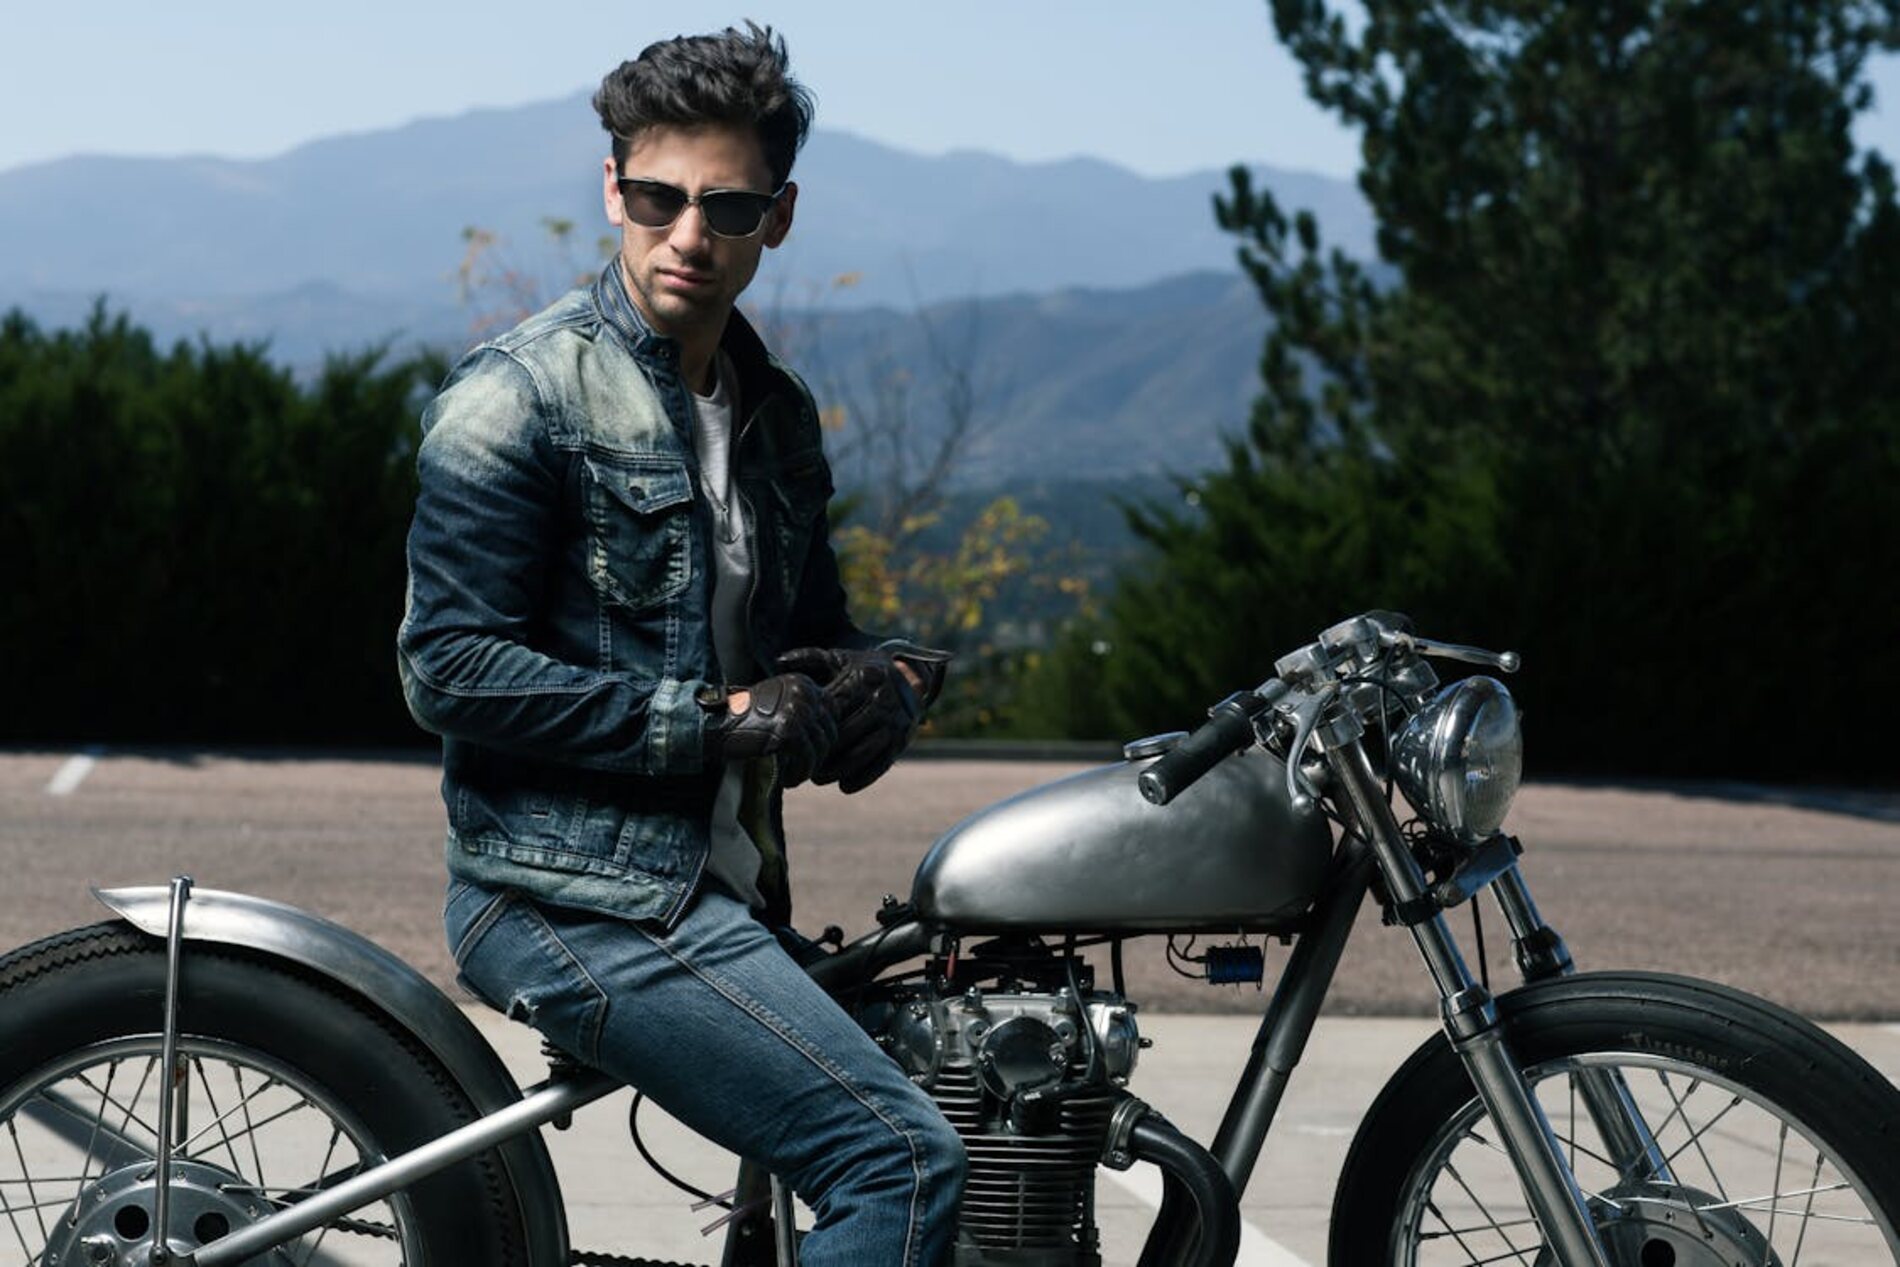 A man in sunglasses sitting on a motorcycle